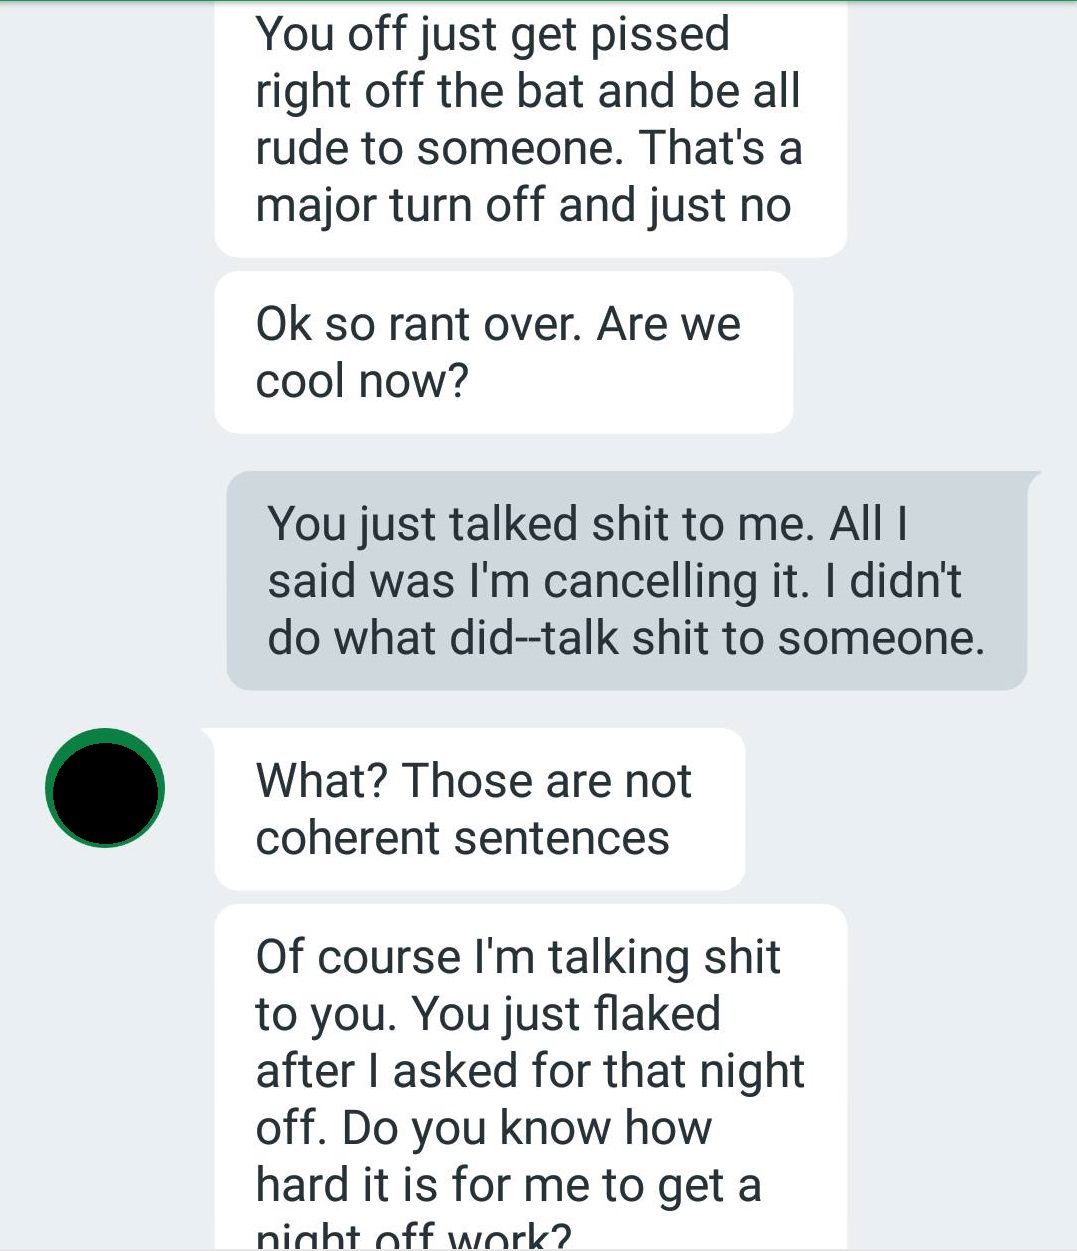 girlfriend gets porno texts from co-worker